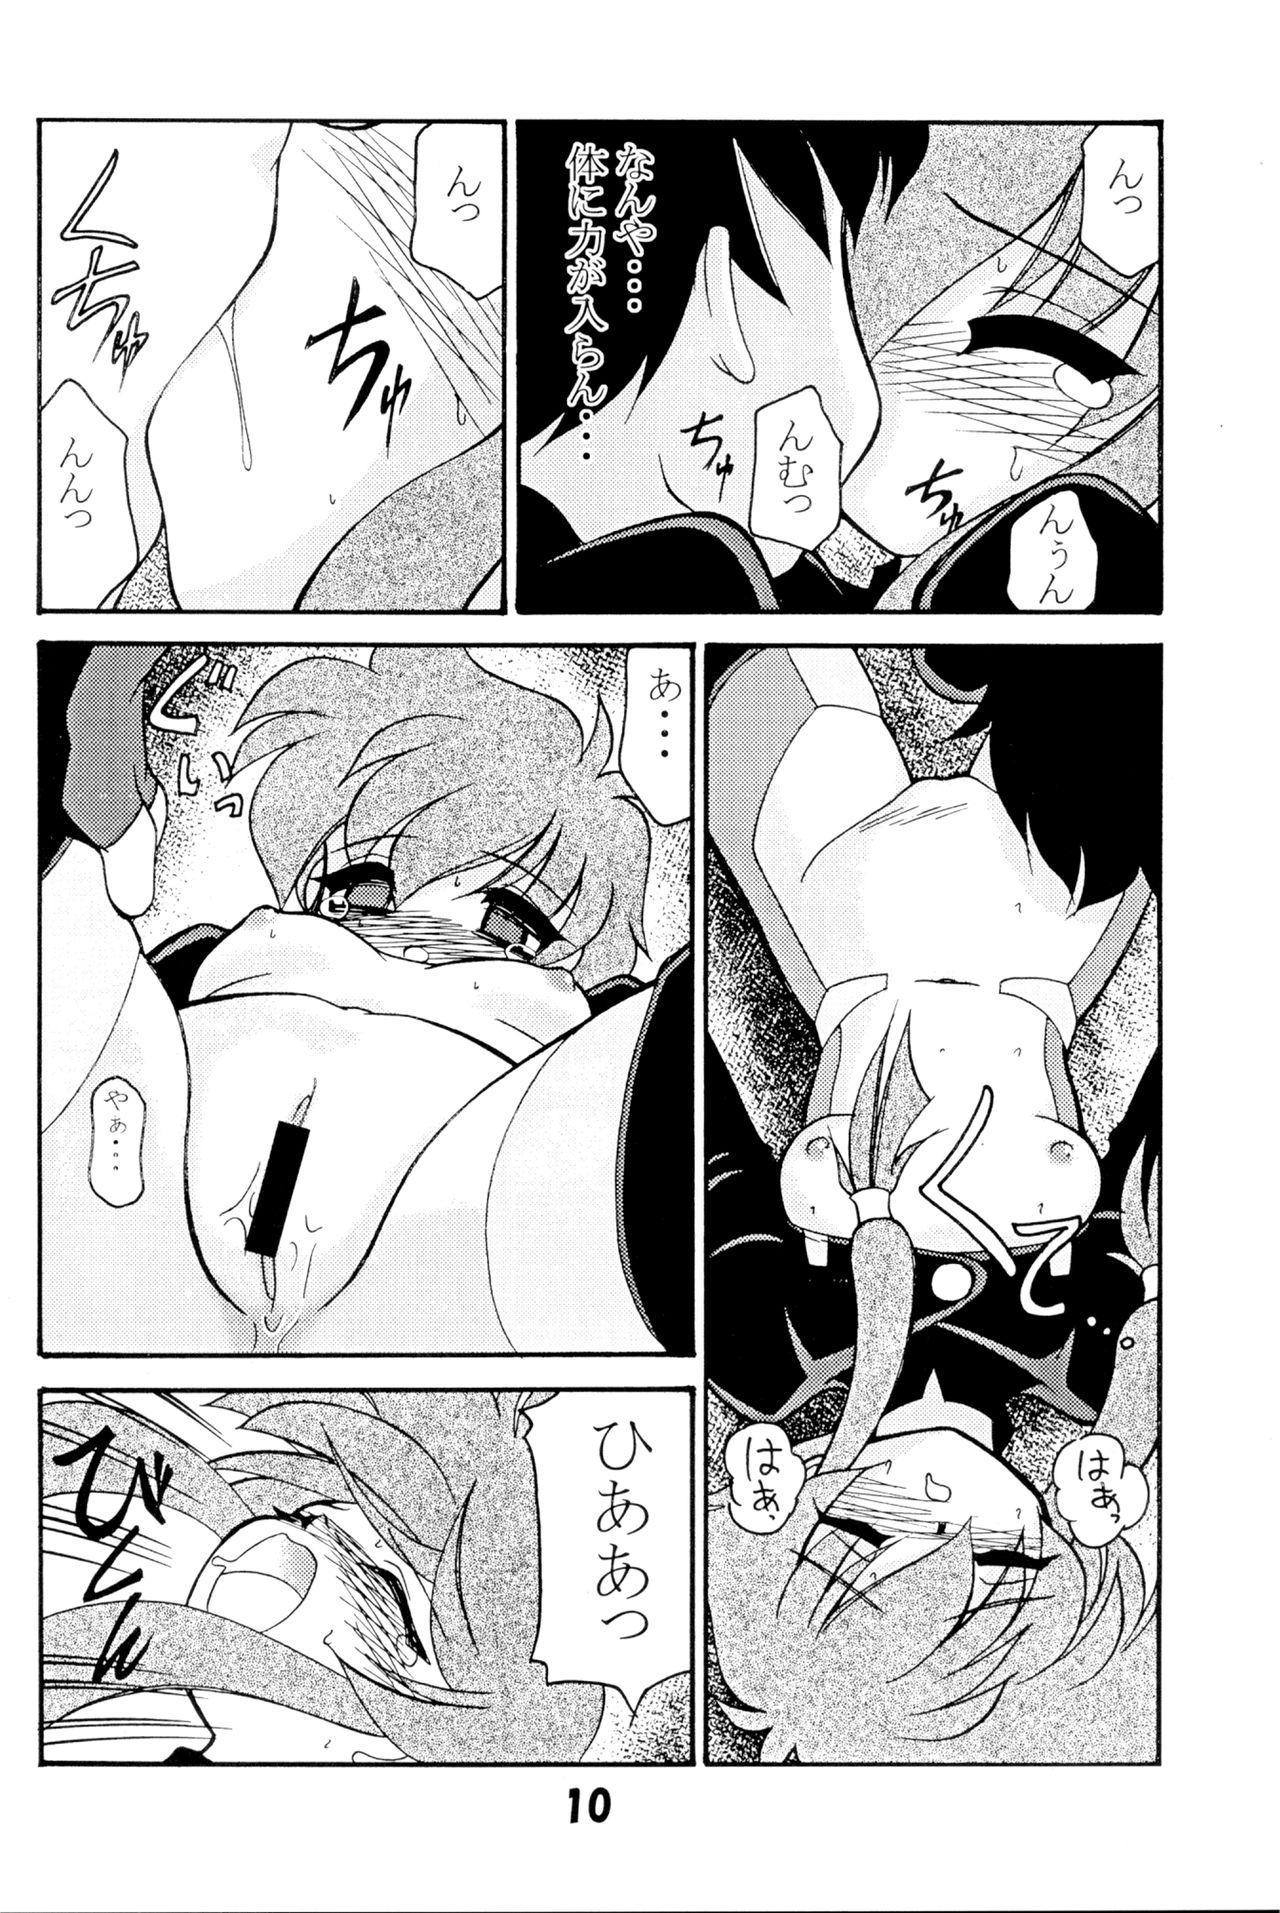 Watersports VERSUS - Magic knight rayearth Angelic layer Hoe - Page 9